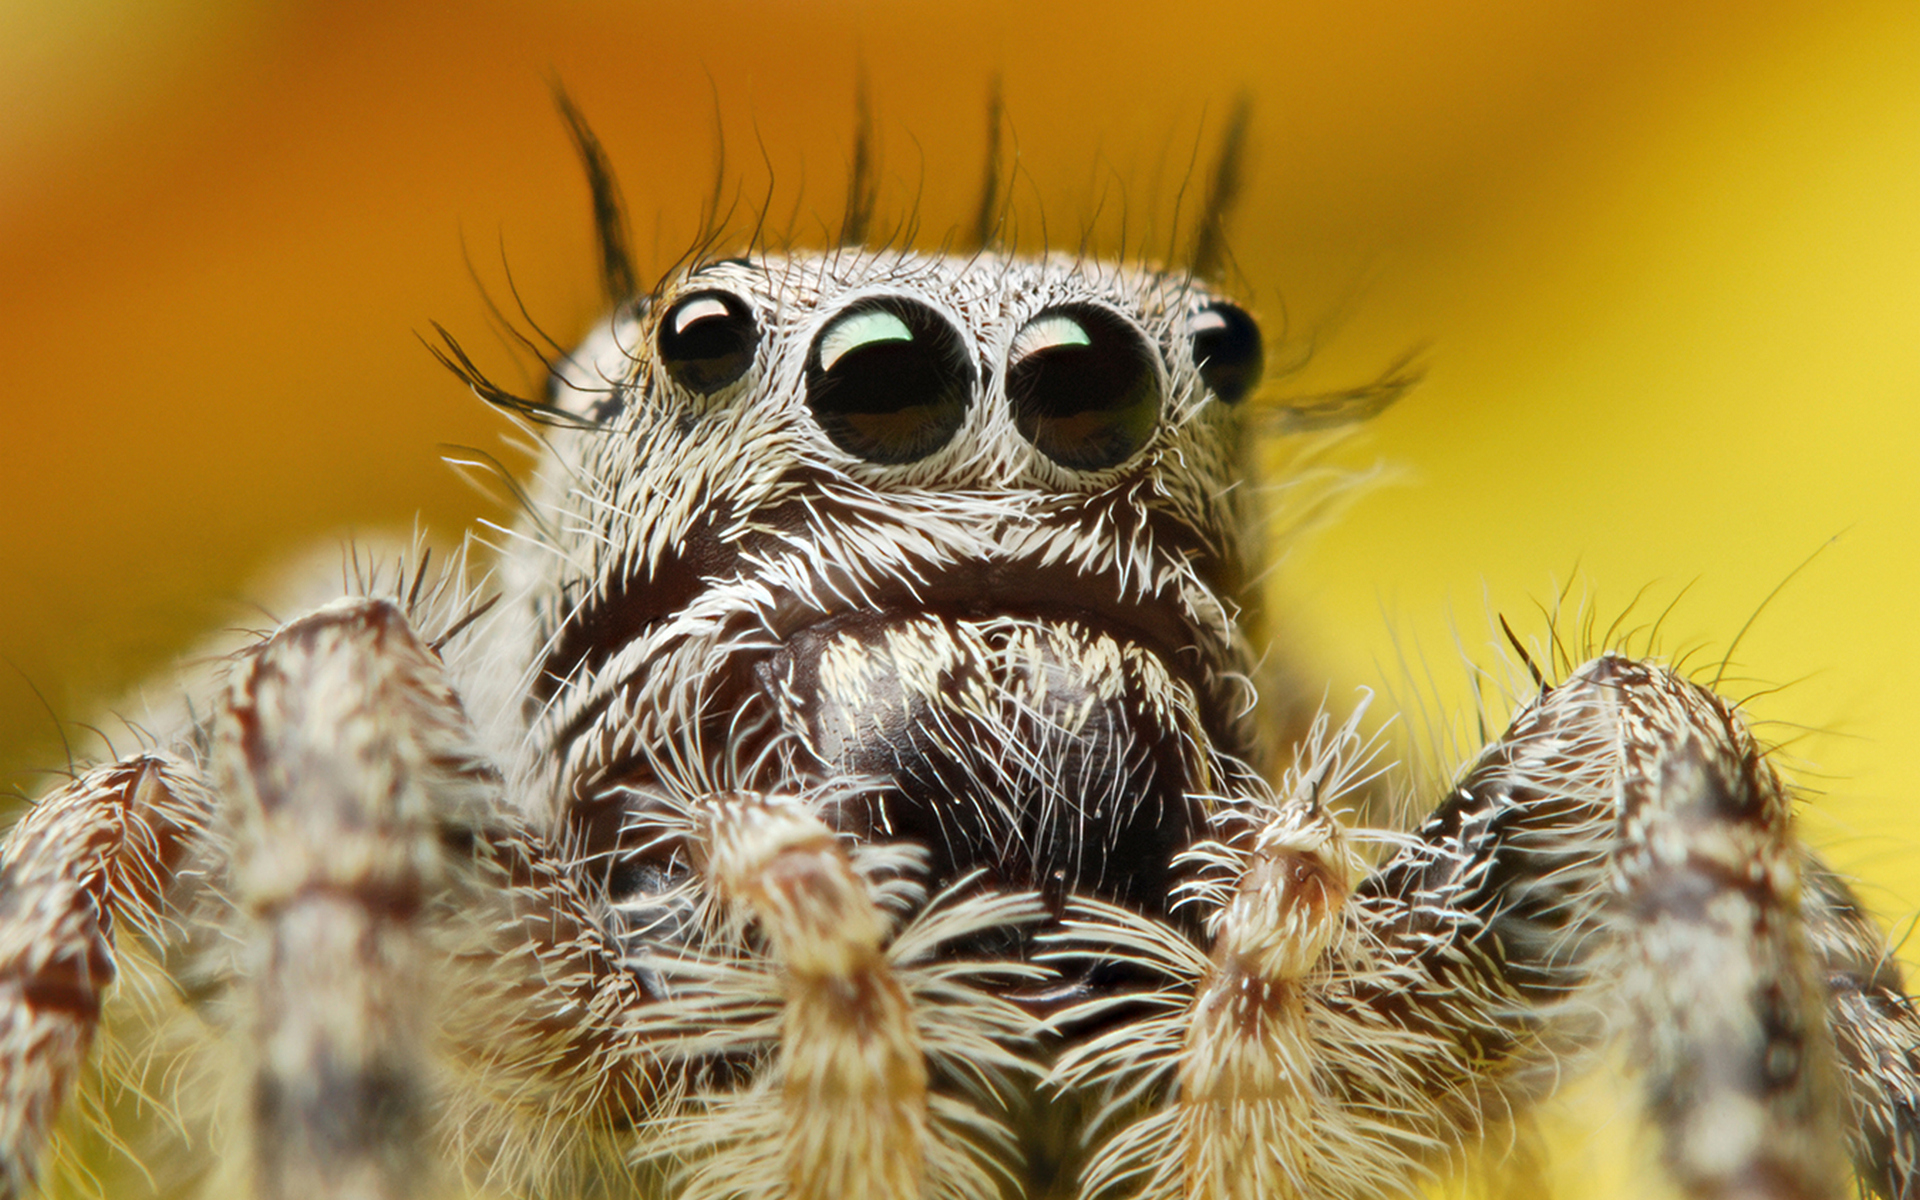 Wallpapers spider muzzle eyes on the desktop